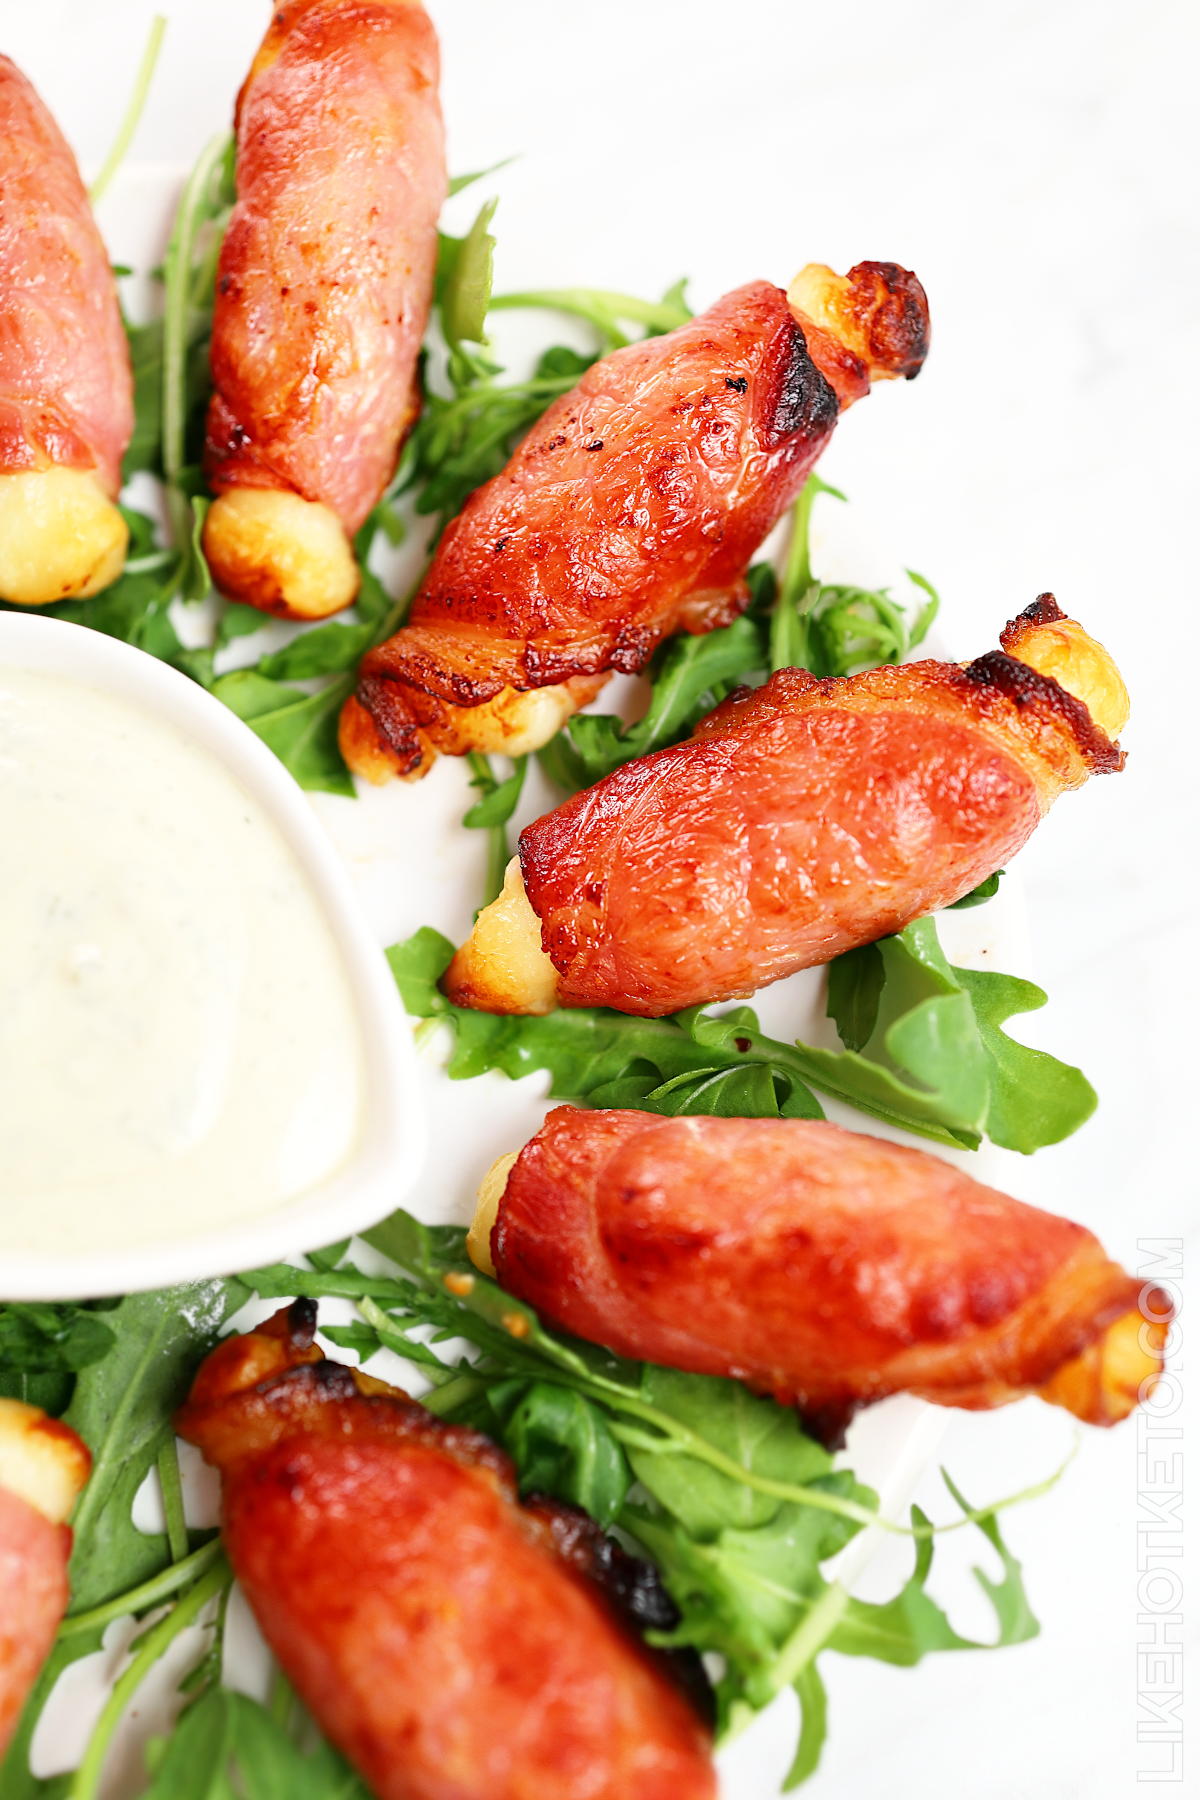 A plate of crispy air fried bacon wrapped halloumi cheese on a bed of arugula leaves.